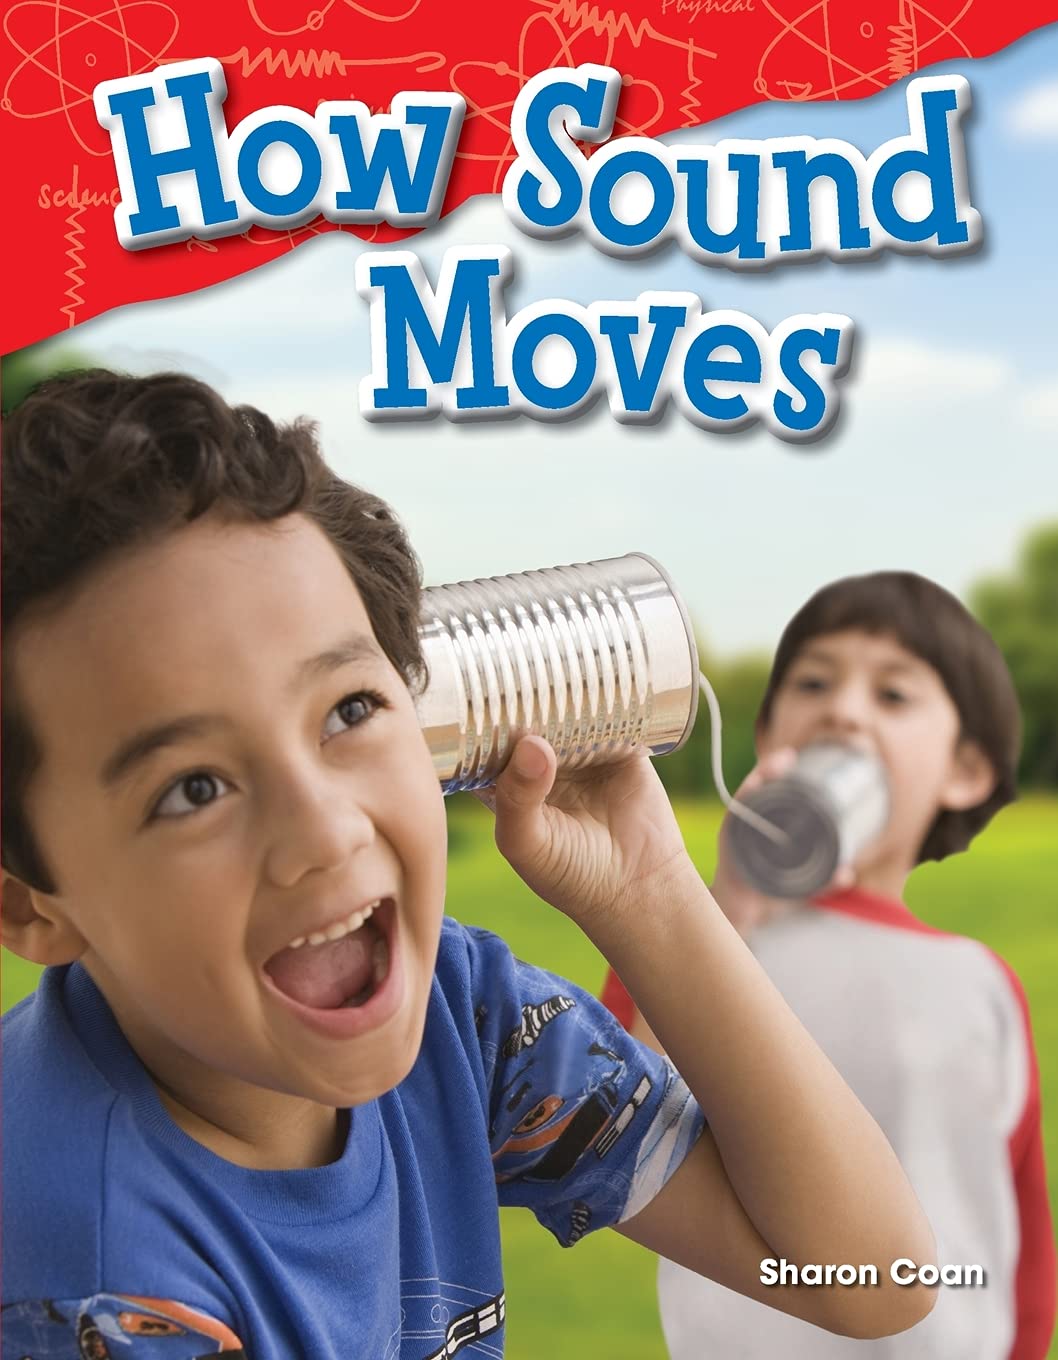 Teacher Created Materials - Science Readers: Content and Literacy: How Sound Moves - Grade 1 - Guided Reading Level M